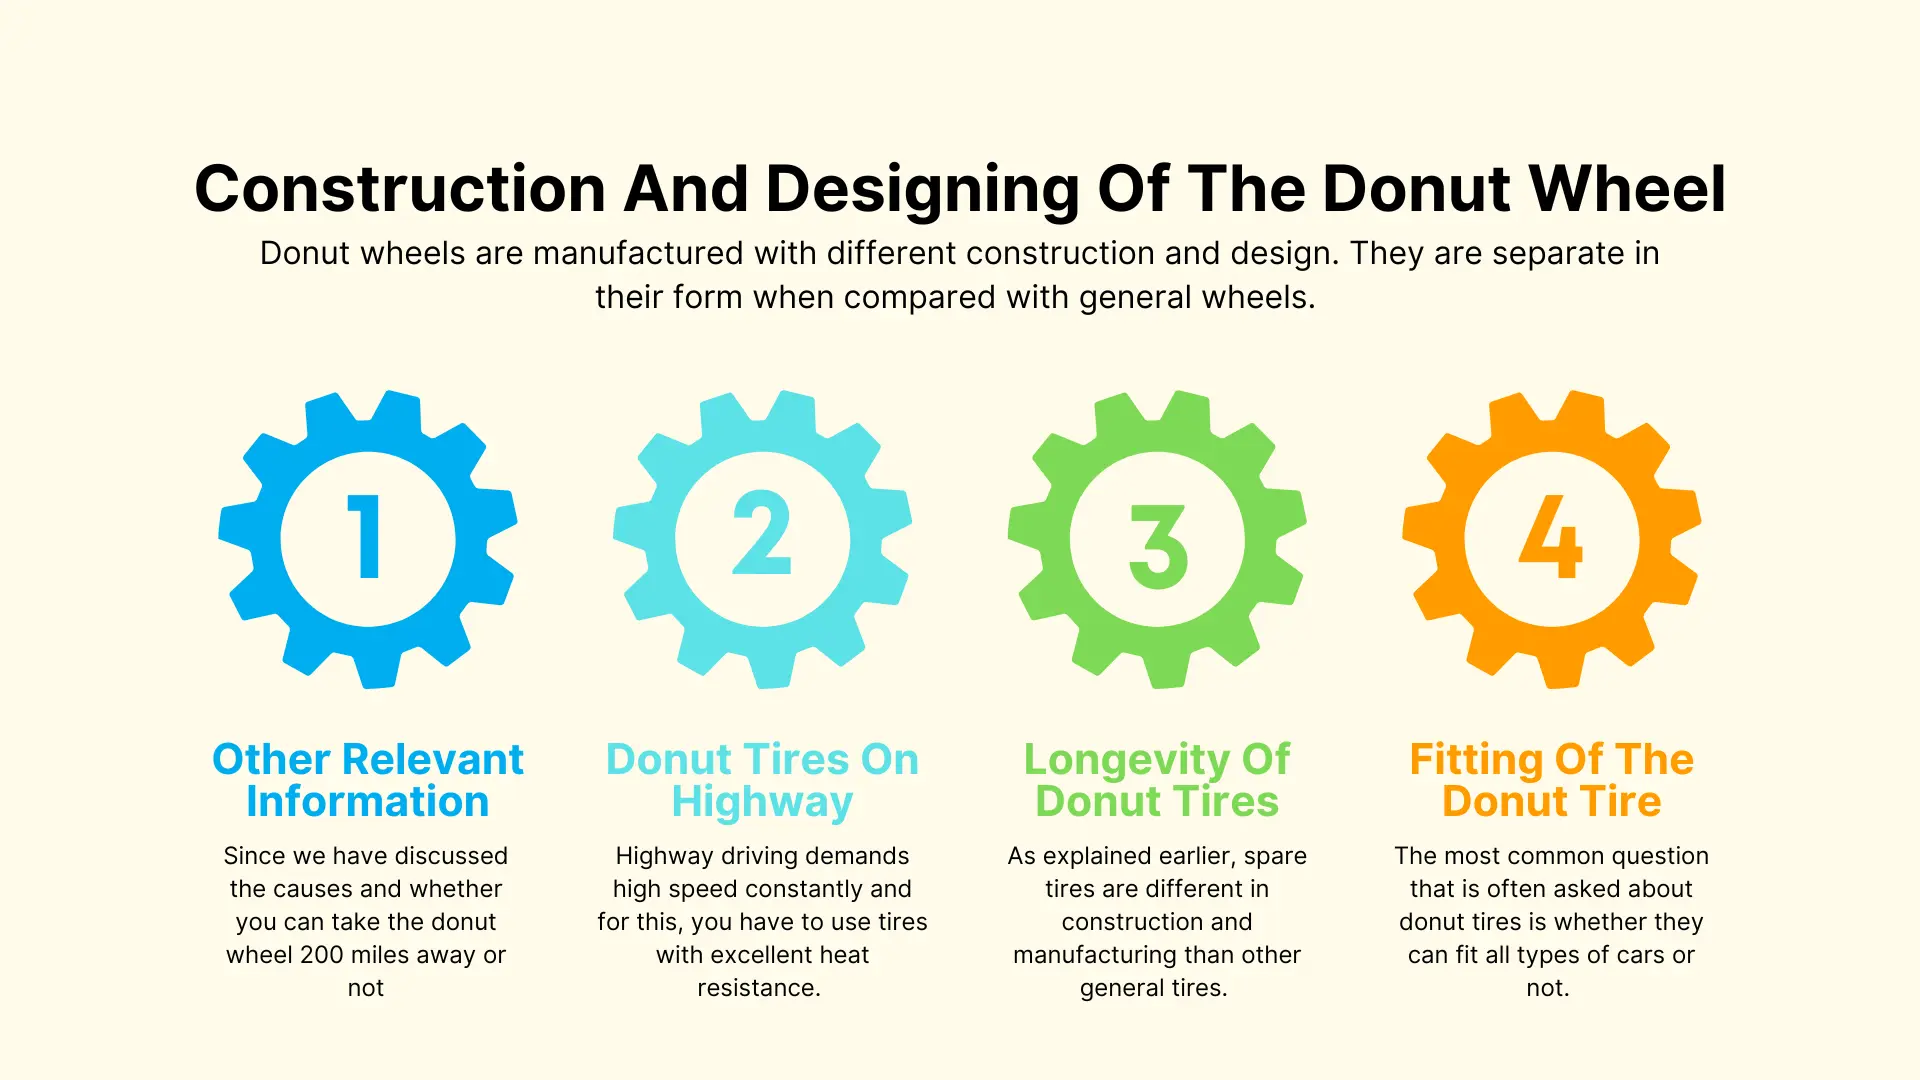 Construction And Designing Of The Donut Wheel